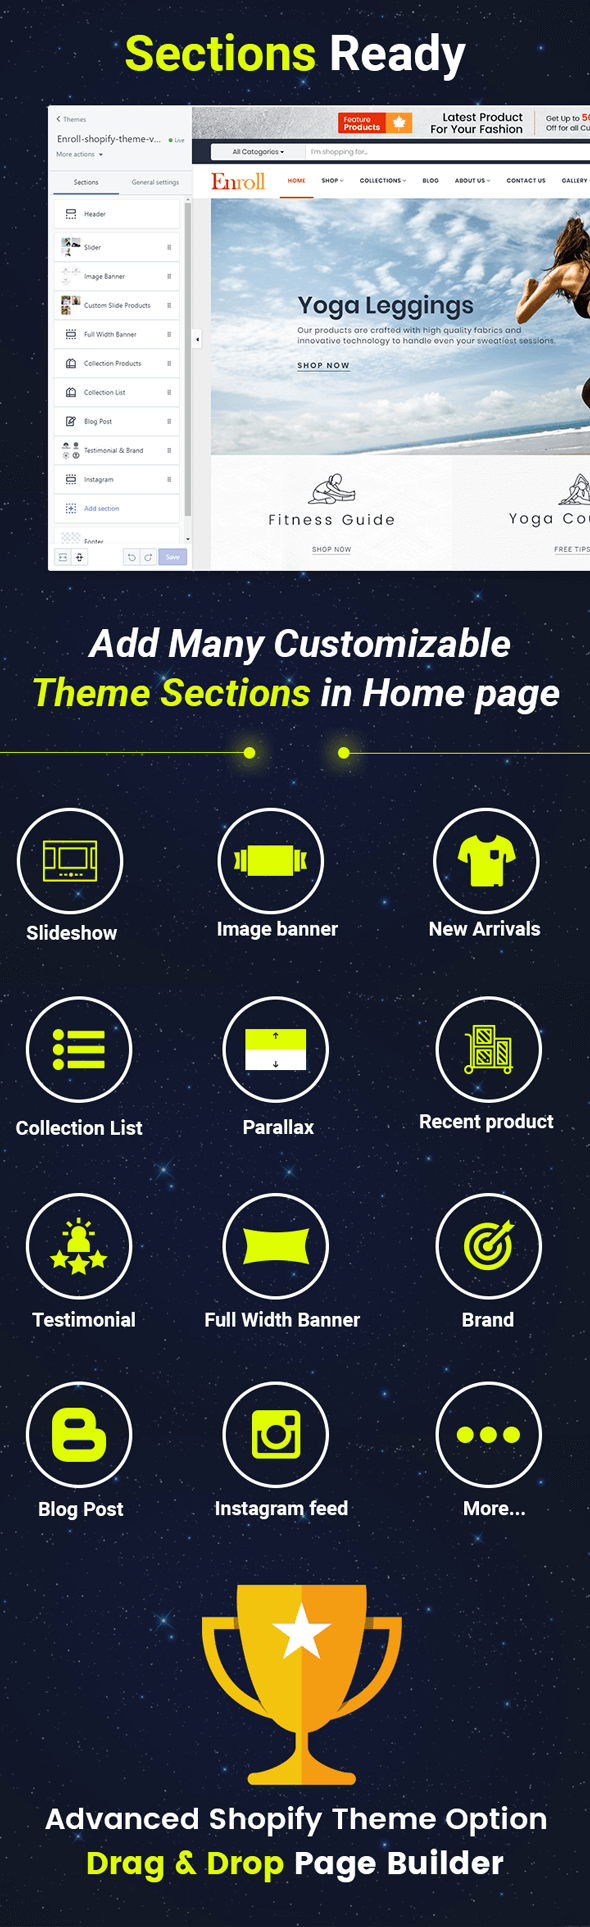 Full Theme Features